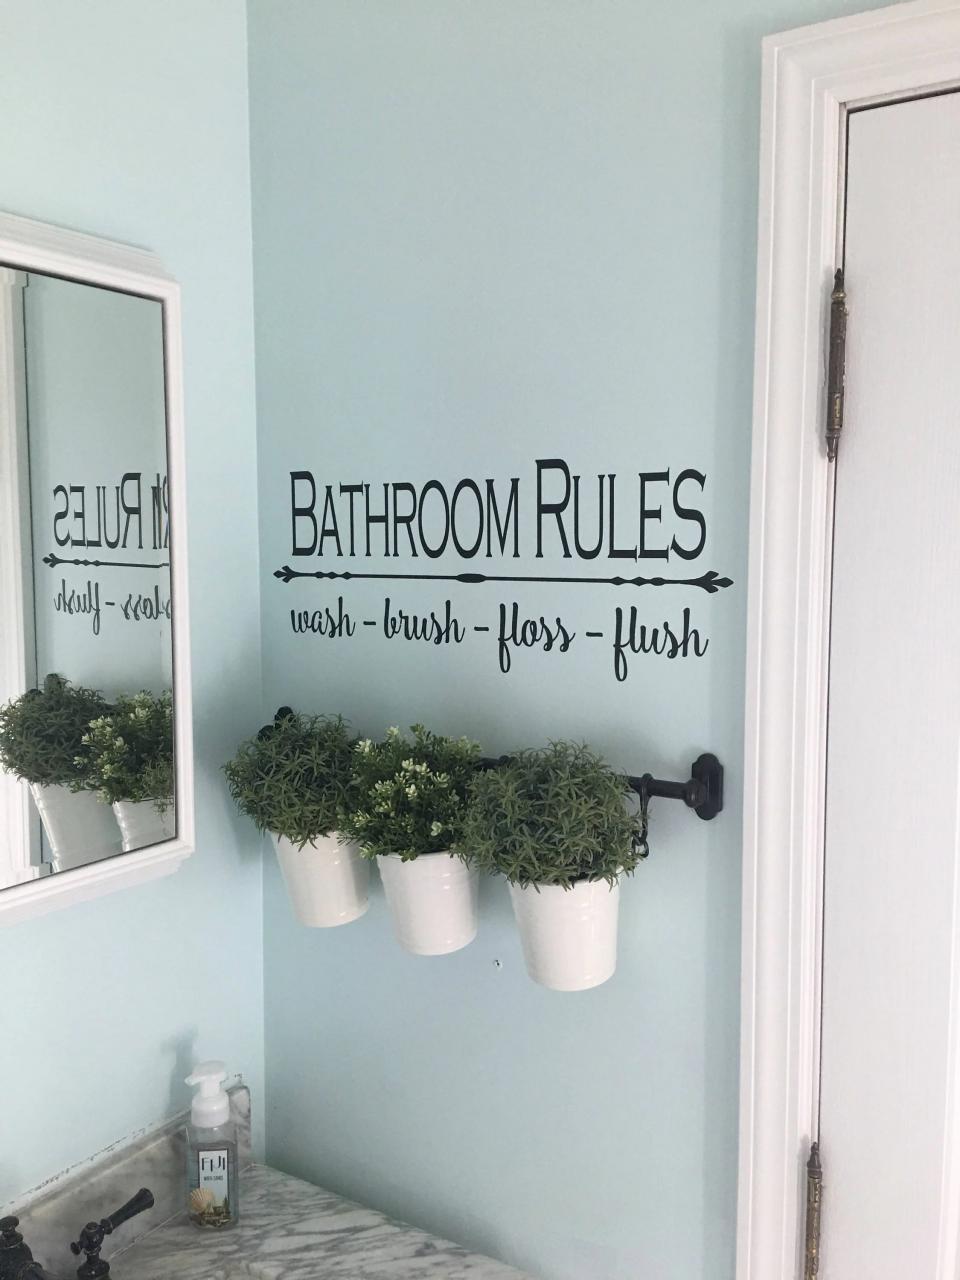 Bathroom Rules vinyl decal, Wall Decal, Wall Sign, Home Decor, Home